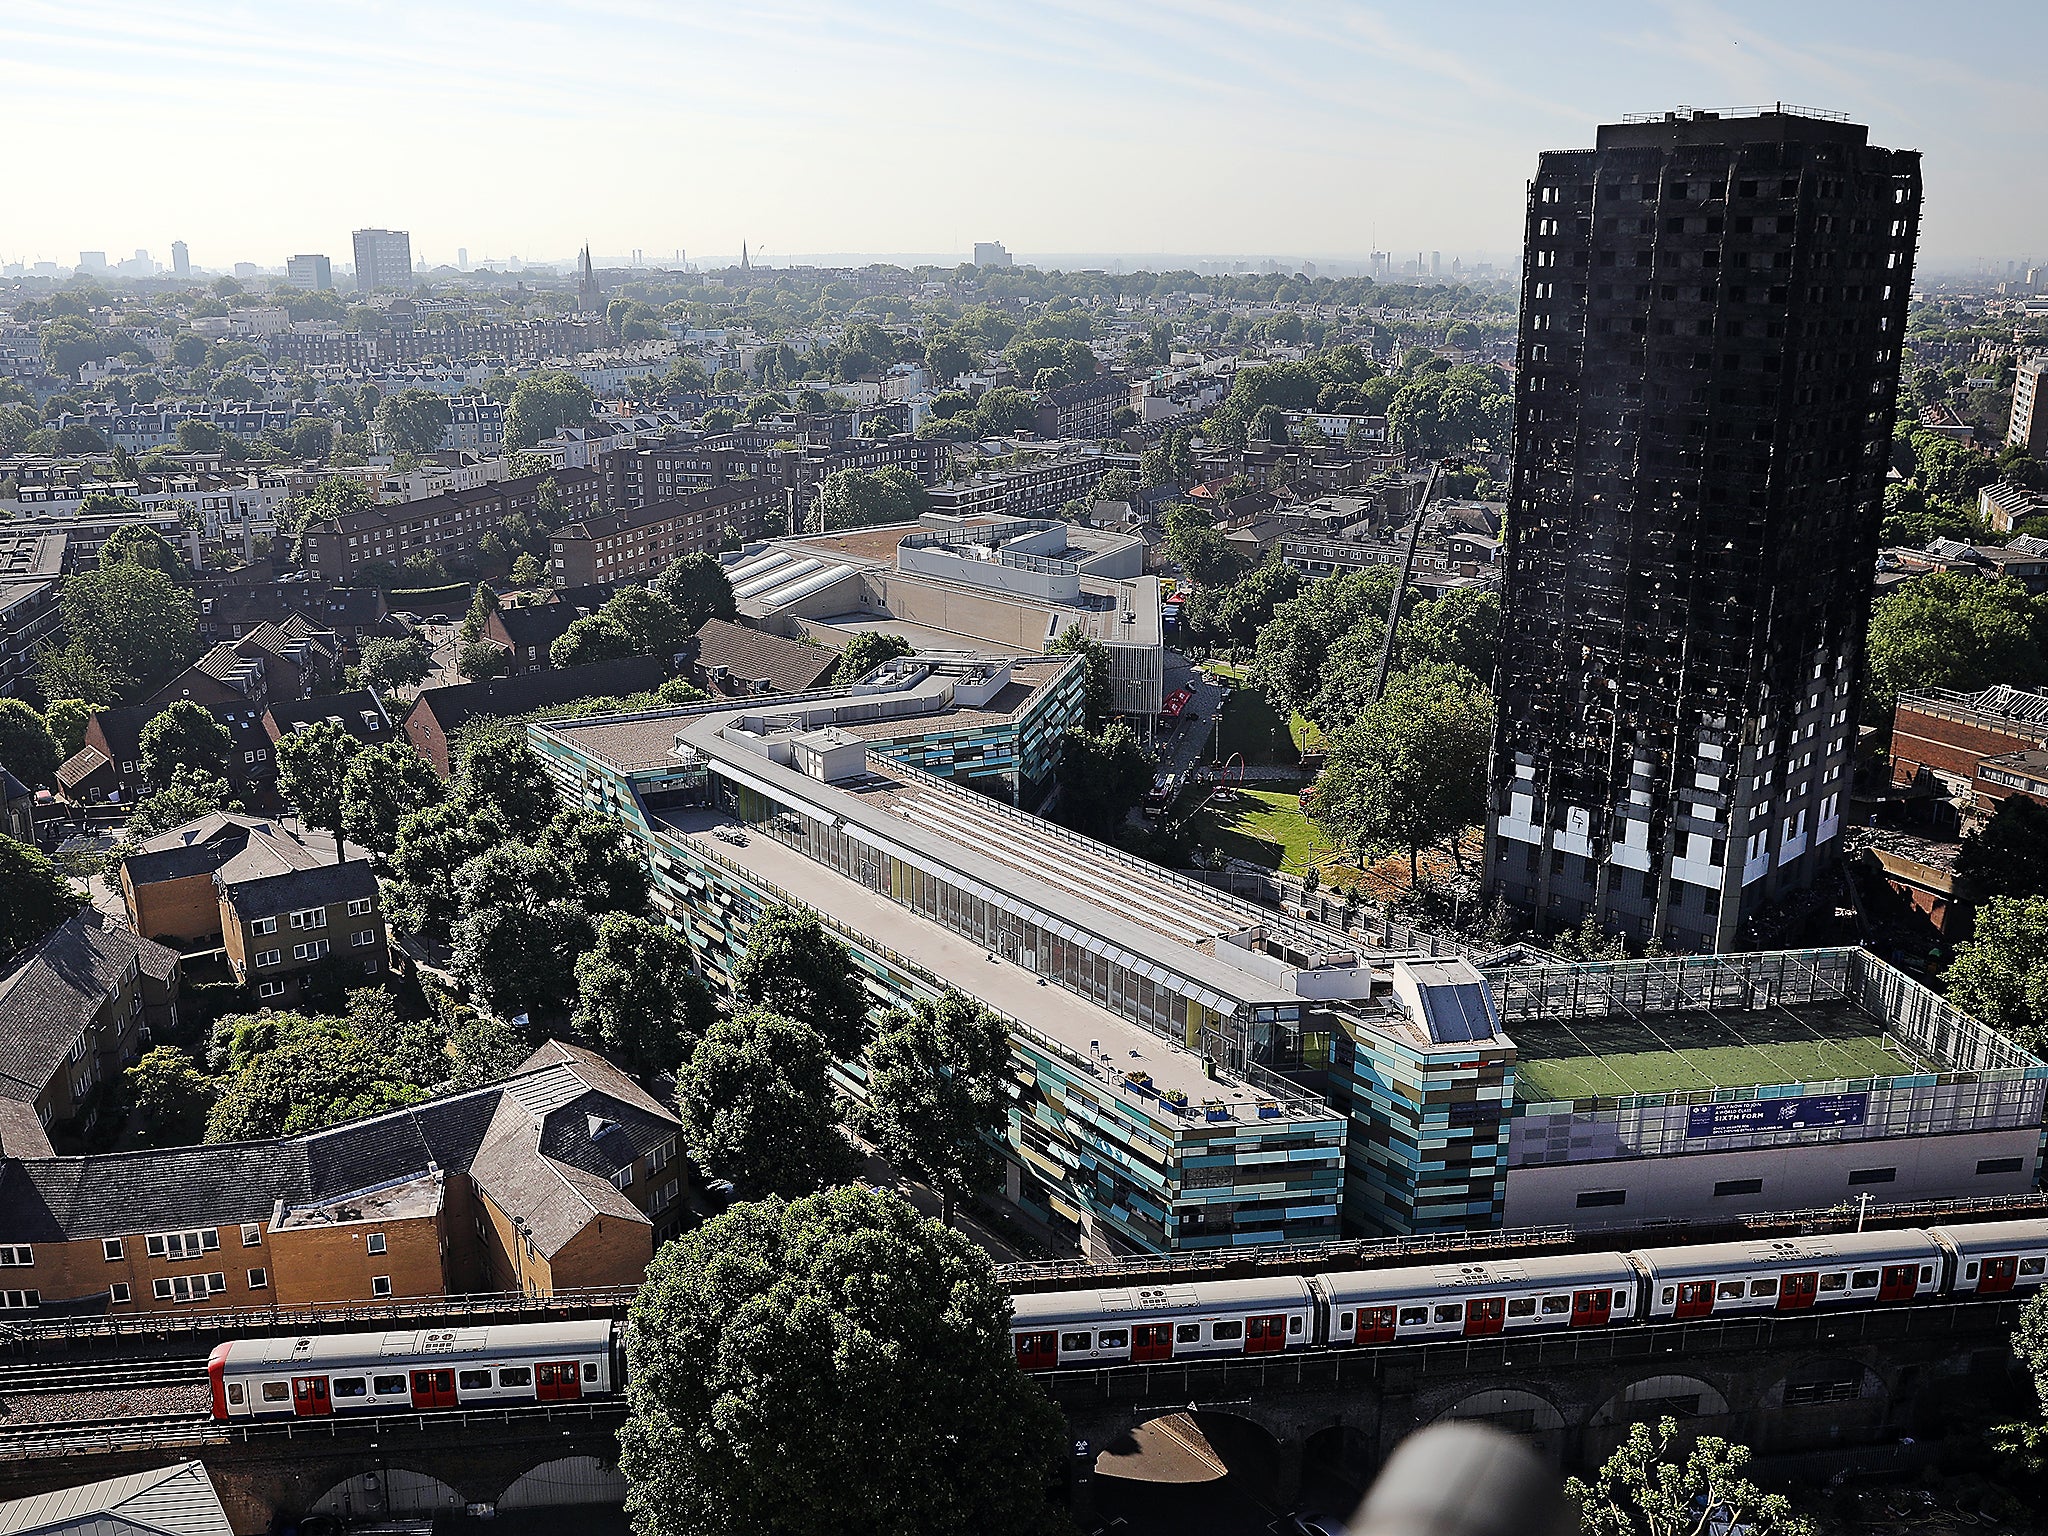 The All-Party Parliamentary Fire Safety and Rescue Group pleaded for changes to fire regulations in tower blocks such as Grenfell